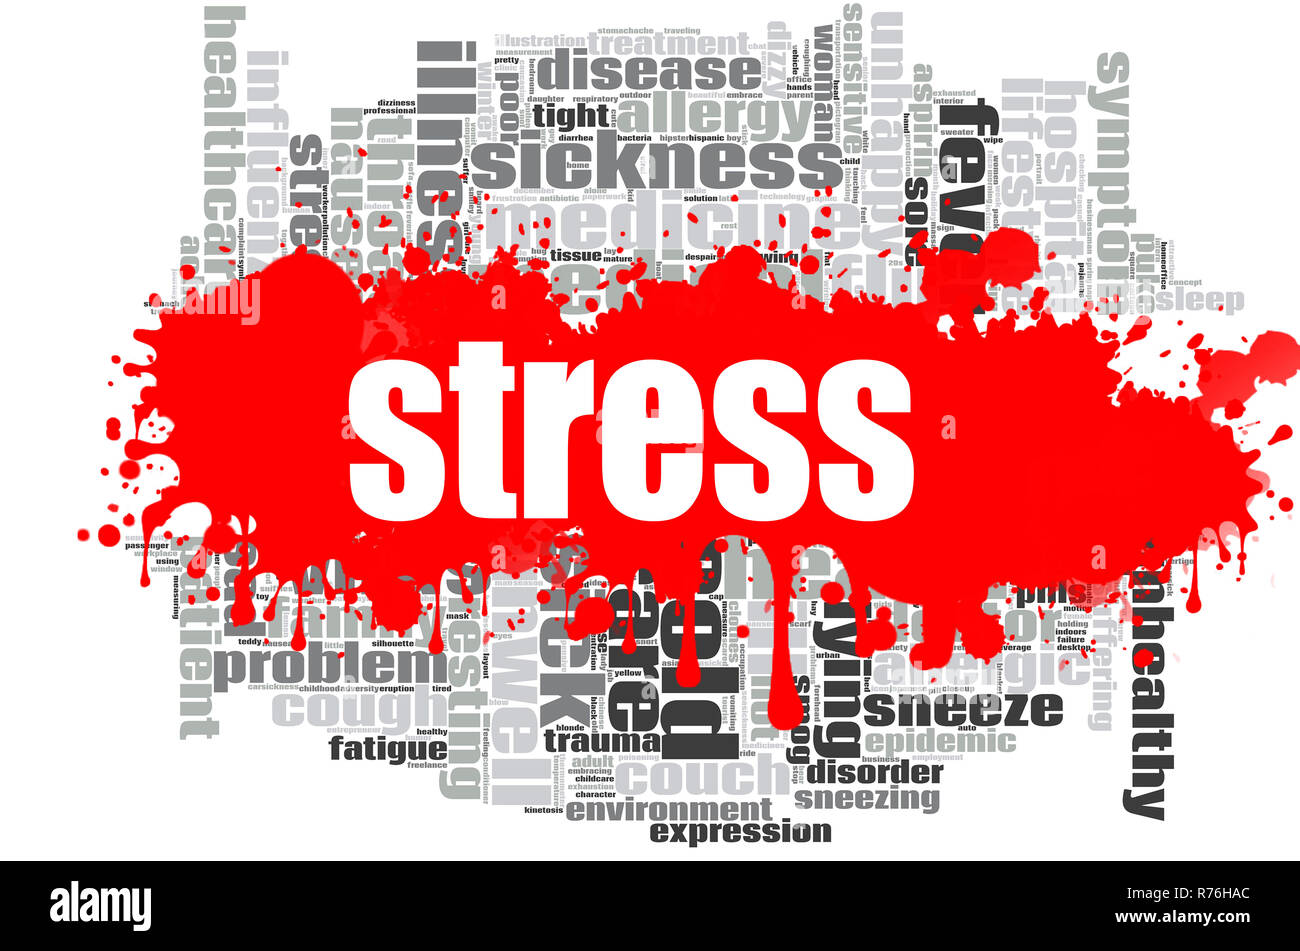 Stress text. Word stress. Word stress images. Слово резерв.